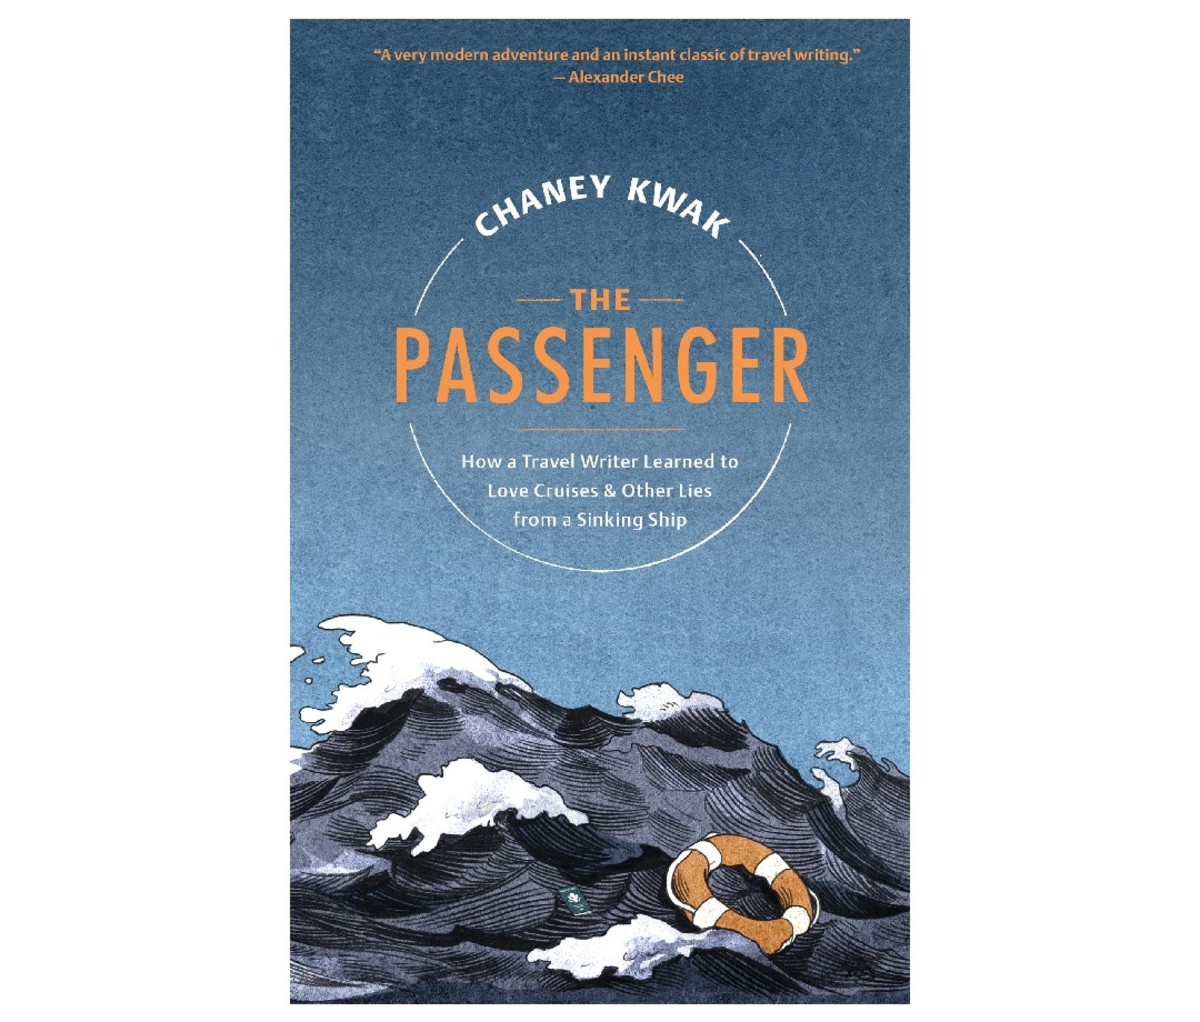 The book cover for The Passenger: How a Travel Writer Learned to Love Cruises & Other Lies from a Sinking Ship by Chaney Kwak